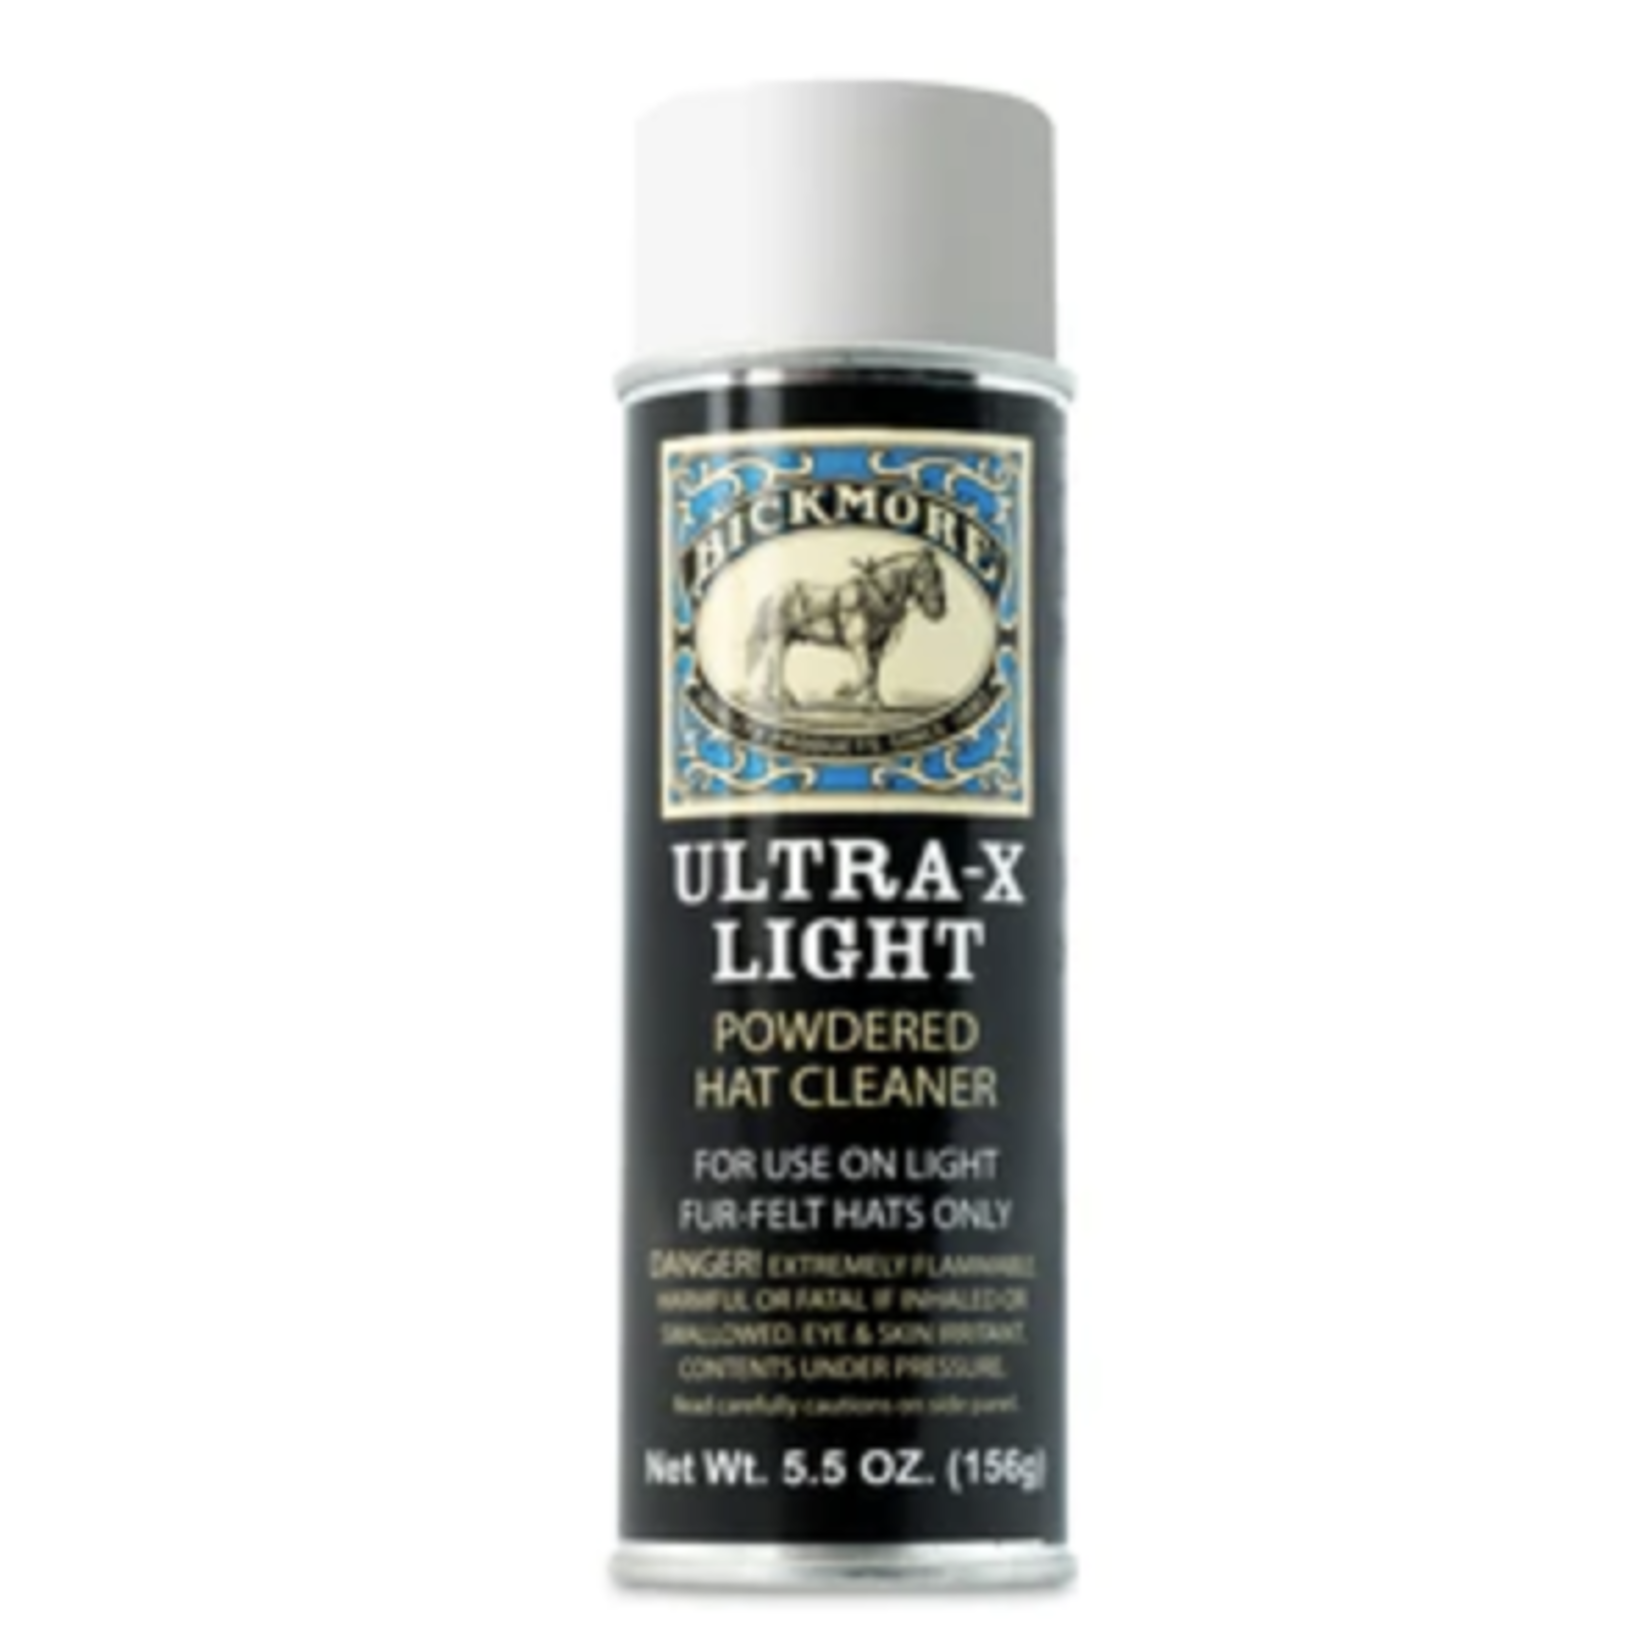 Bickmore Ultra-X Light Powdered Hat Cleaner